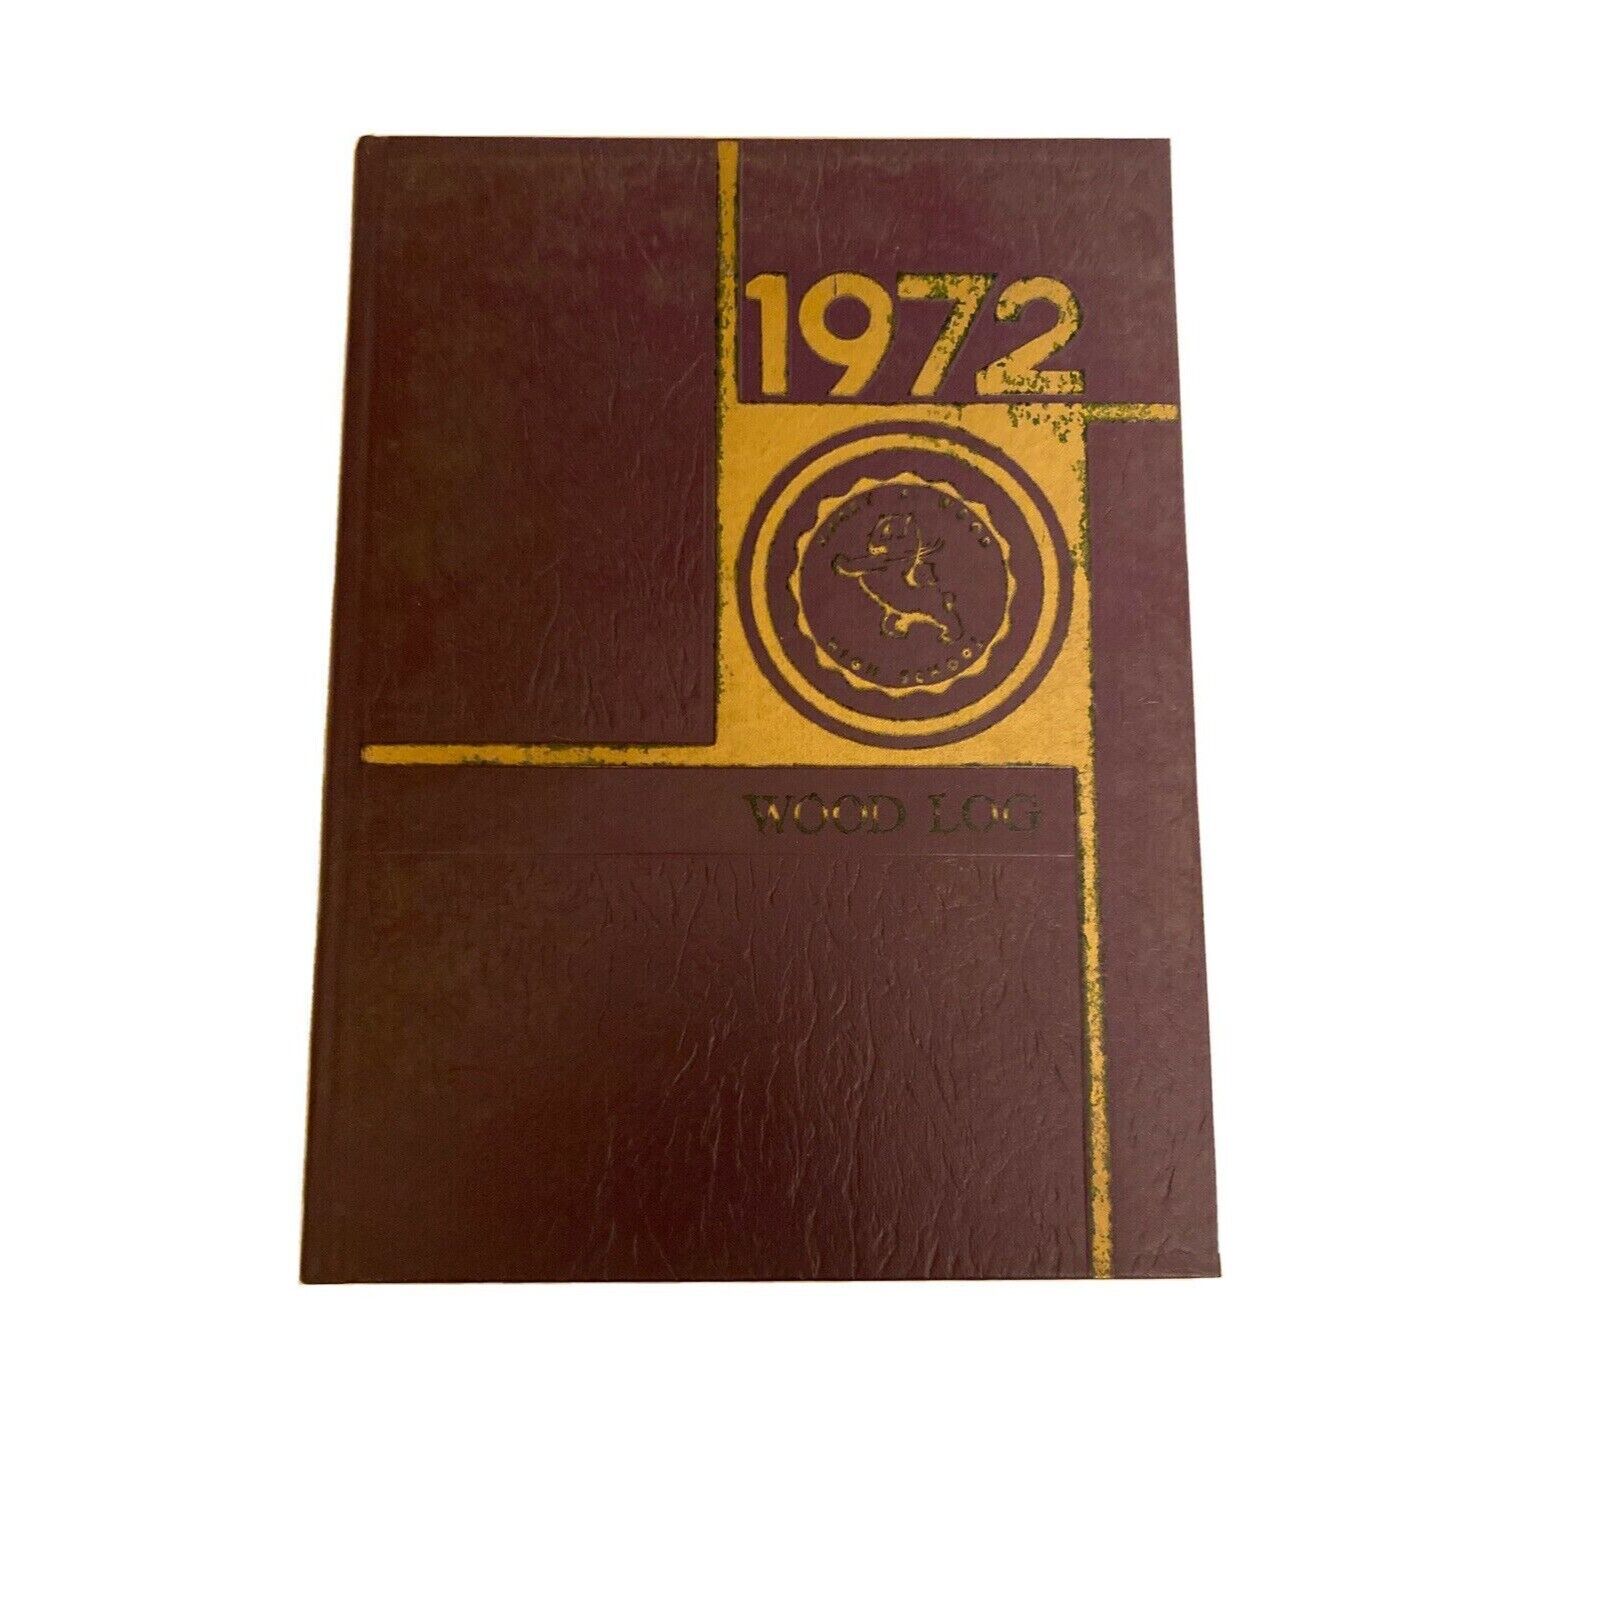 Wood Log 1972 Yearbook Harry E Wood High School Indianapolis Indiana